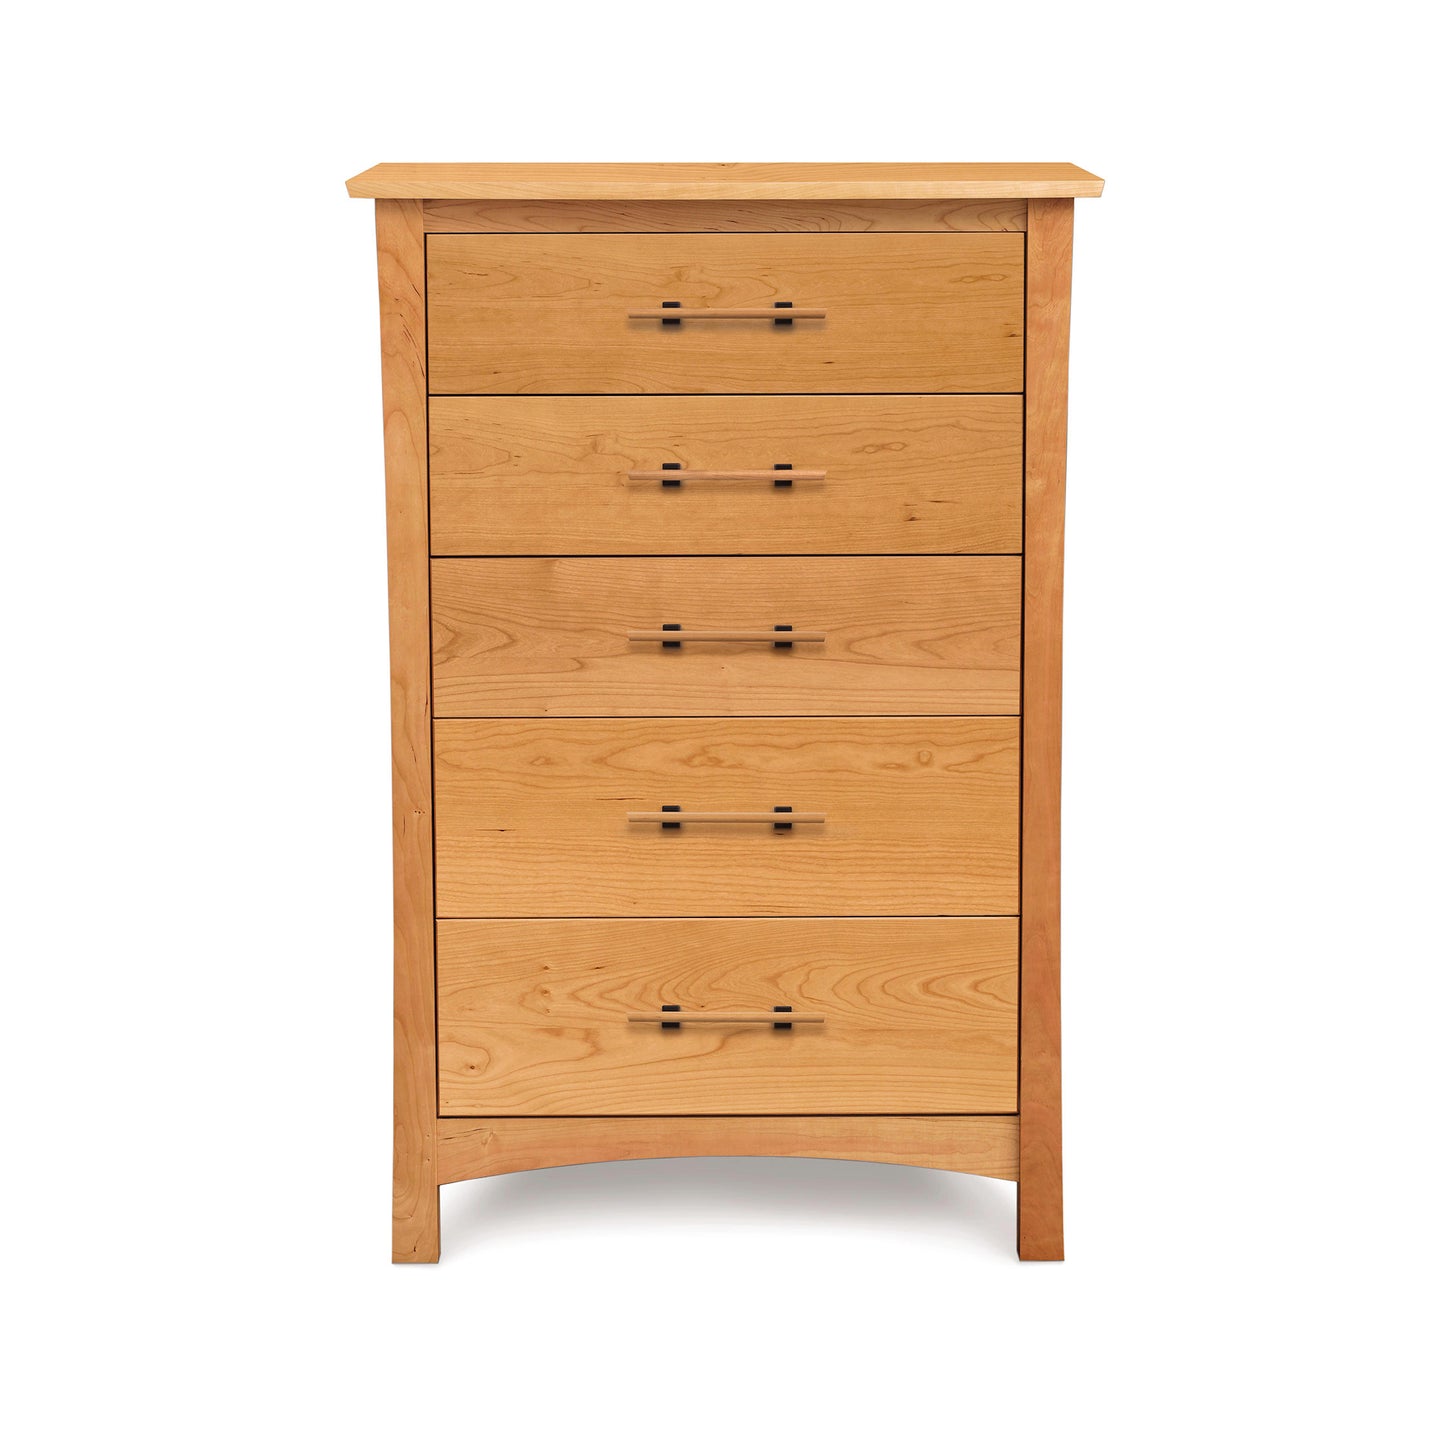 A luxury Monterey 5-Drawer Chest made from cherry wood, on a white background